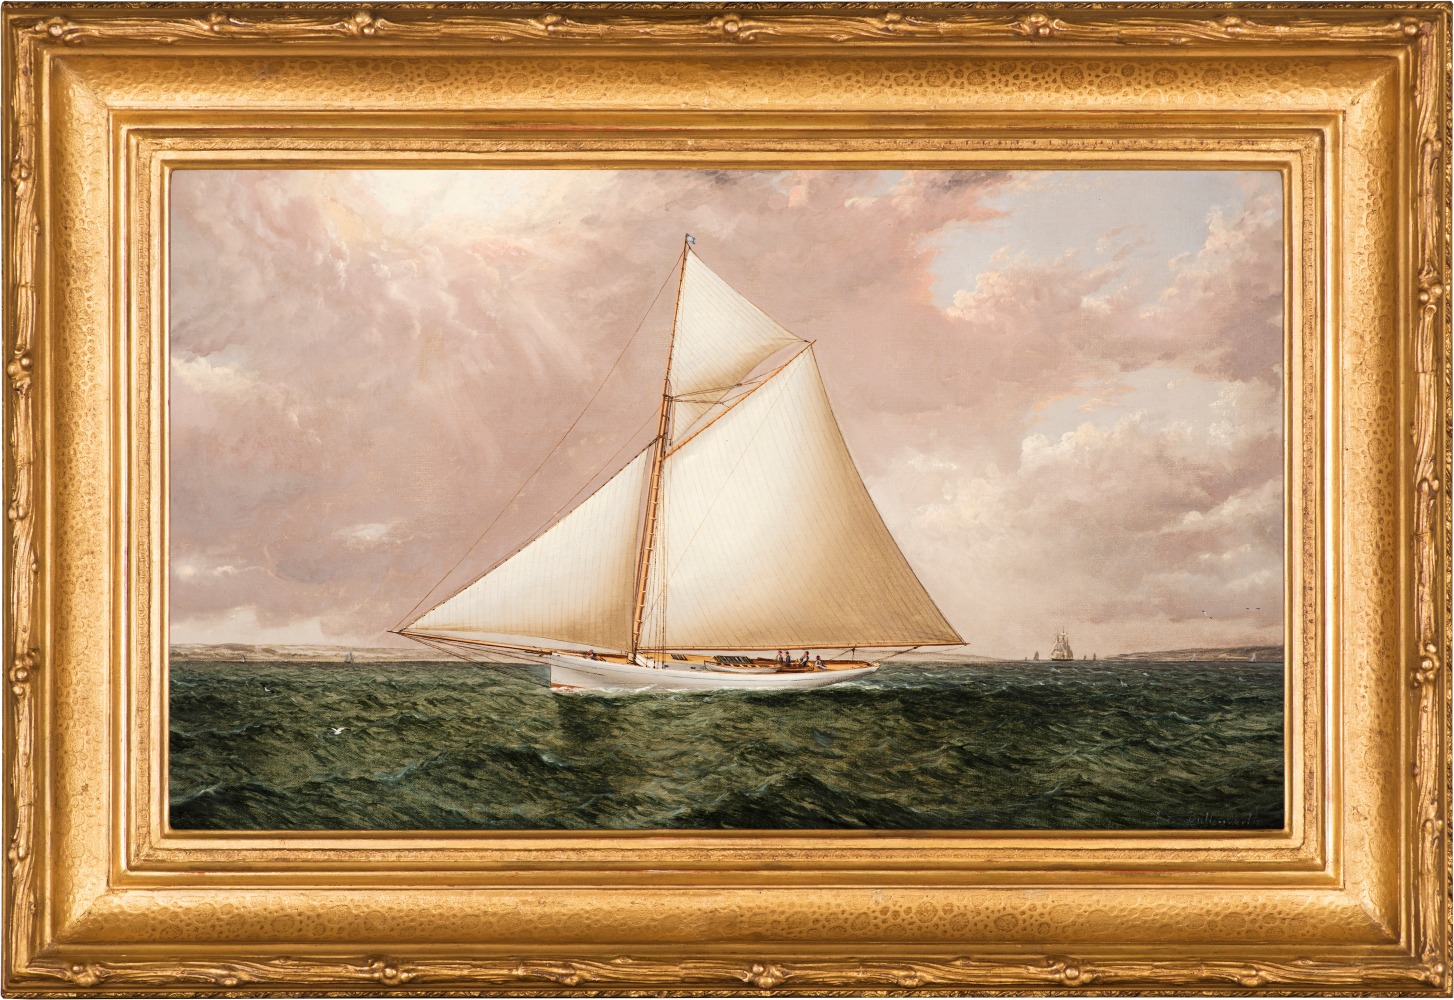 James E. Buttersworth (1817–1894), A Gaff Rigged Racing Cutter, c. 1893, oil on canvas, 12 x 20 in., signed lower right: Jas. Buttersworth (framed)